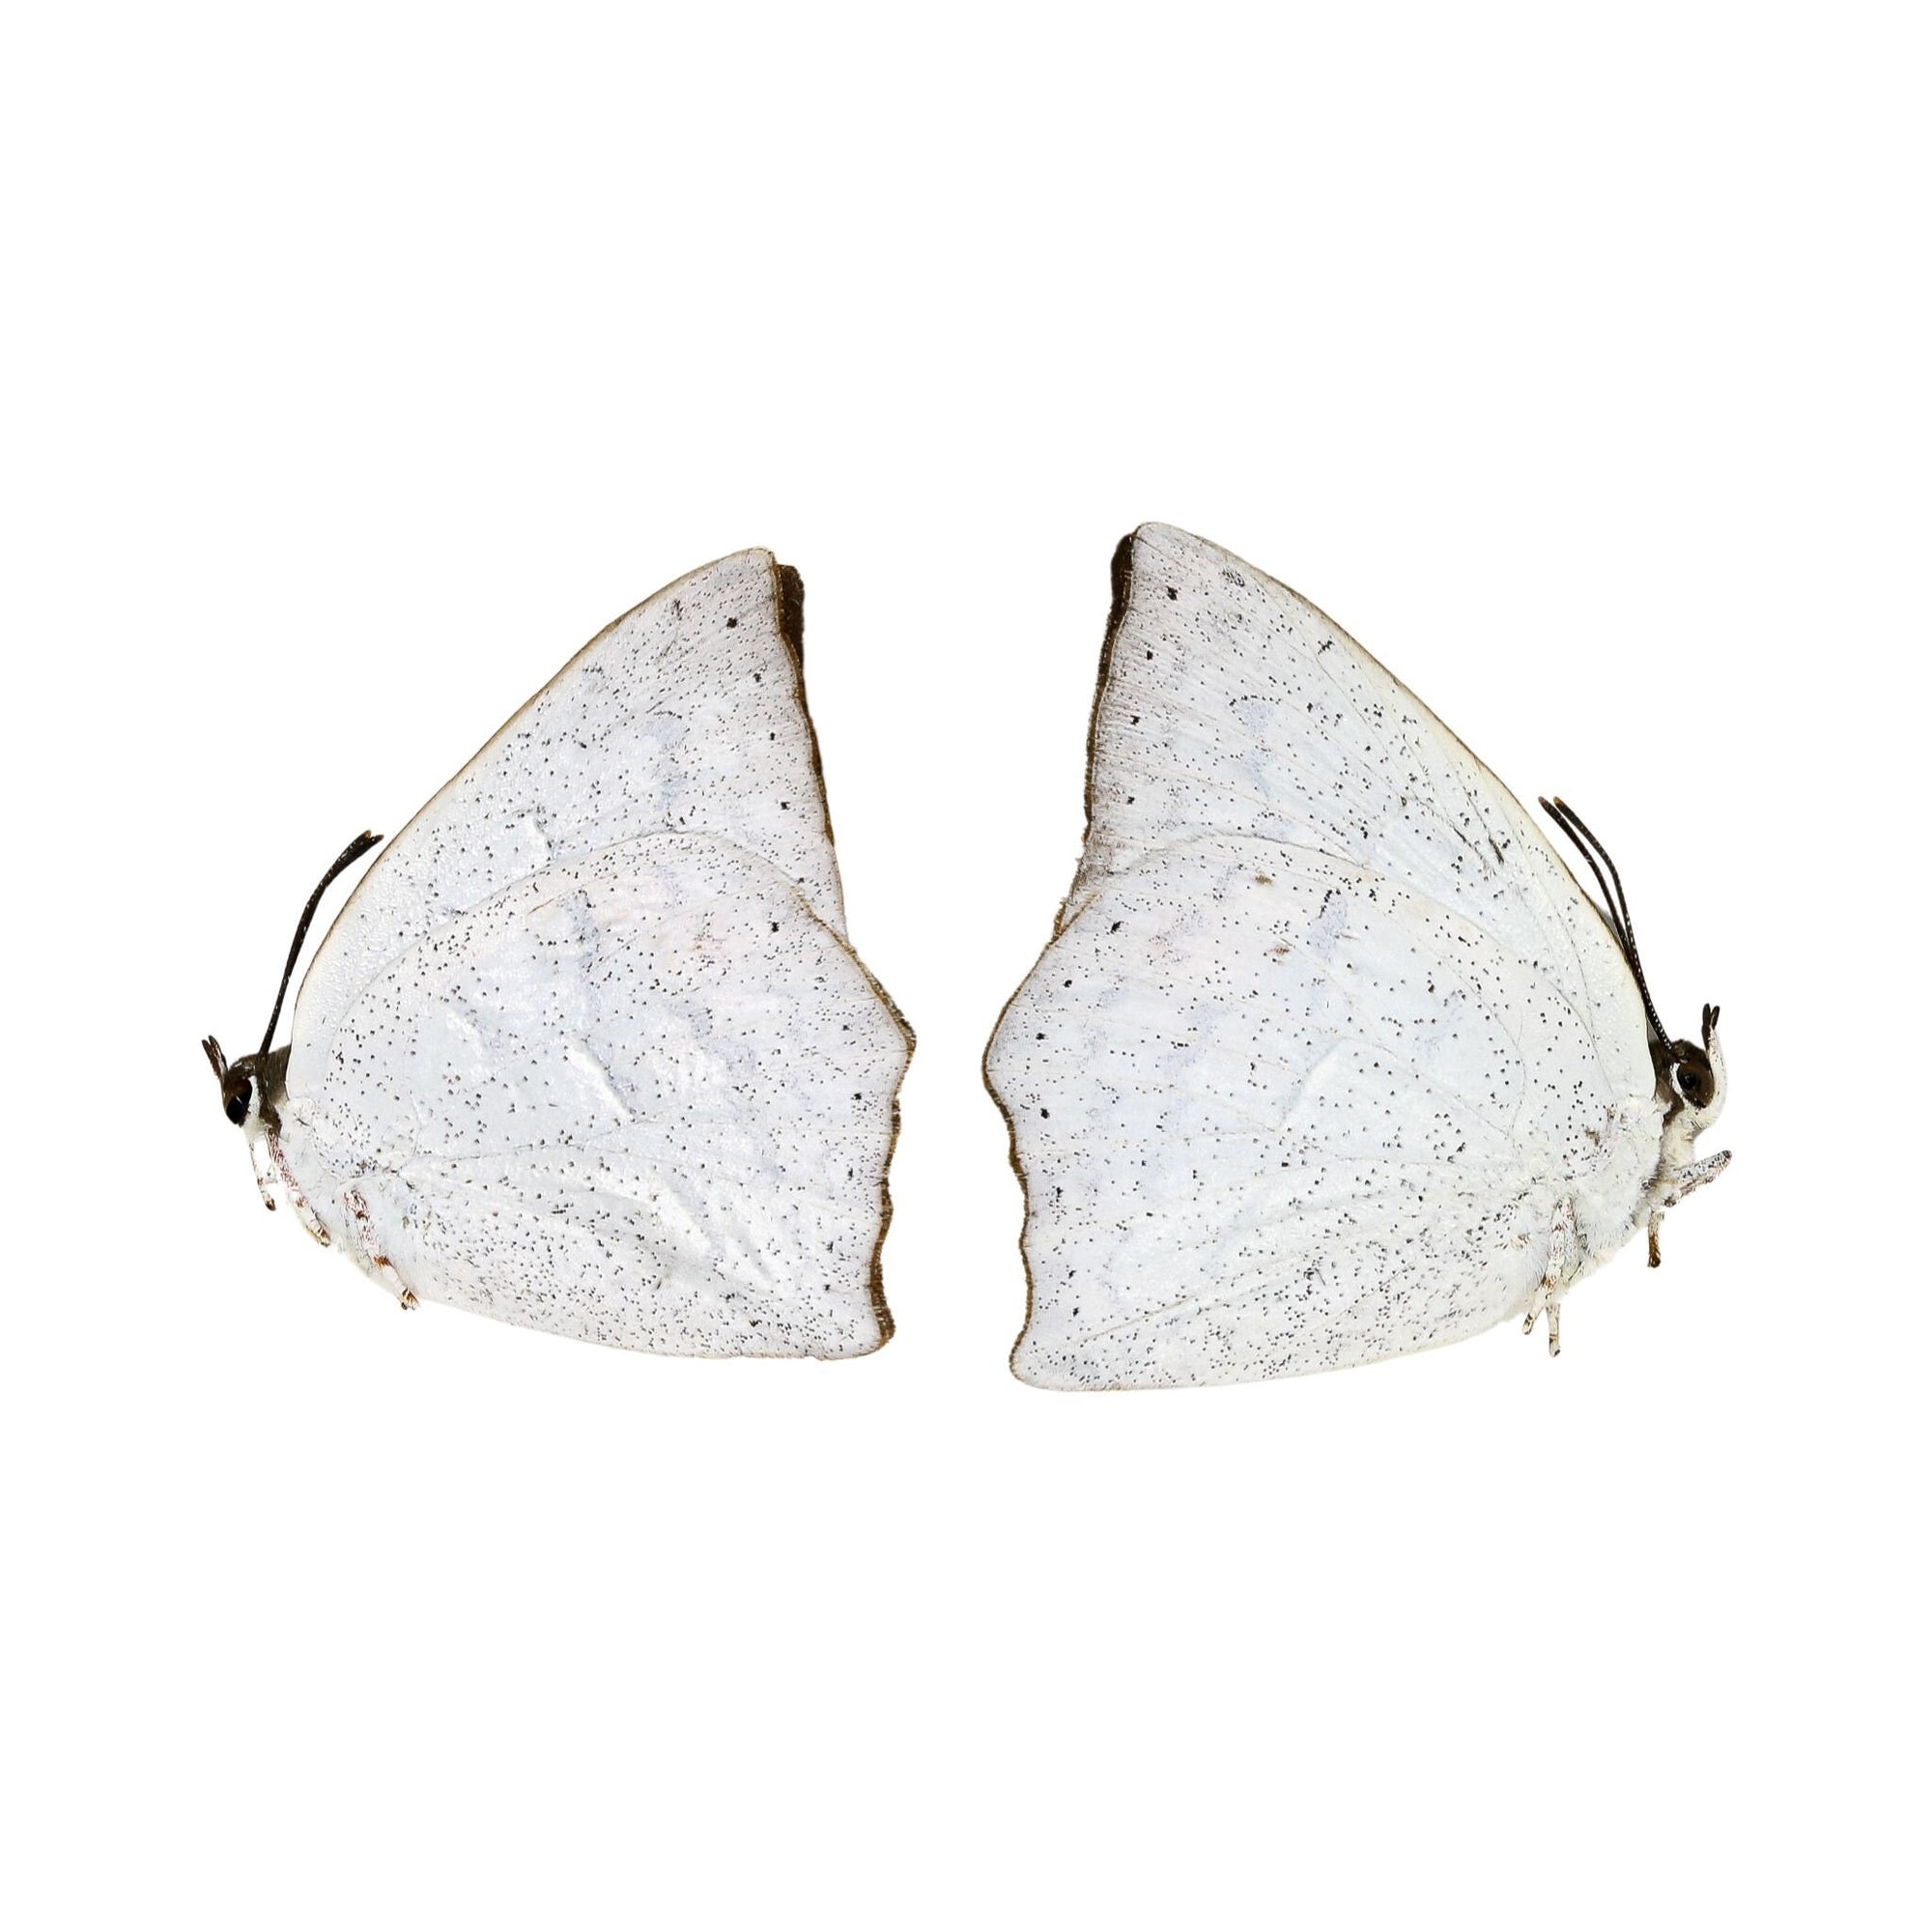 Two (2) Curetis acuta, The Angled Sunbeam, A1 Real Dry-Preserved Unmounted Butterflies, Entomology Taxidermy Specimens